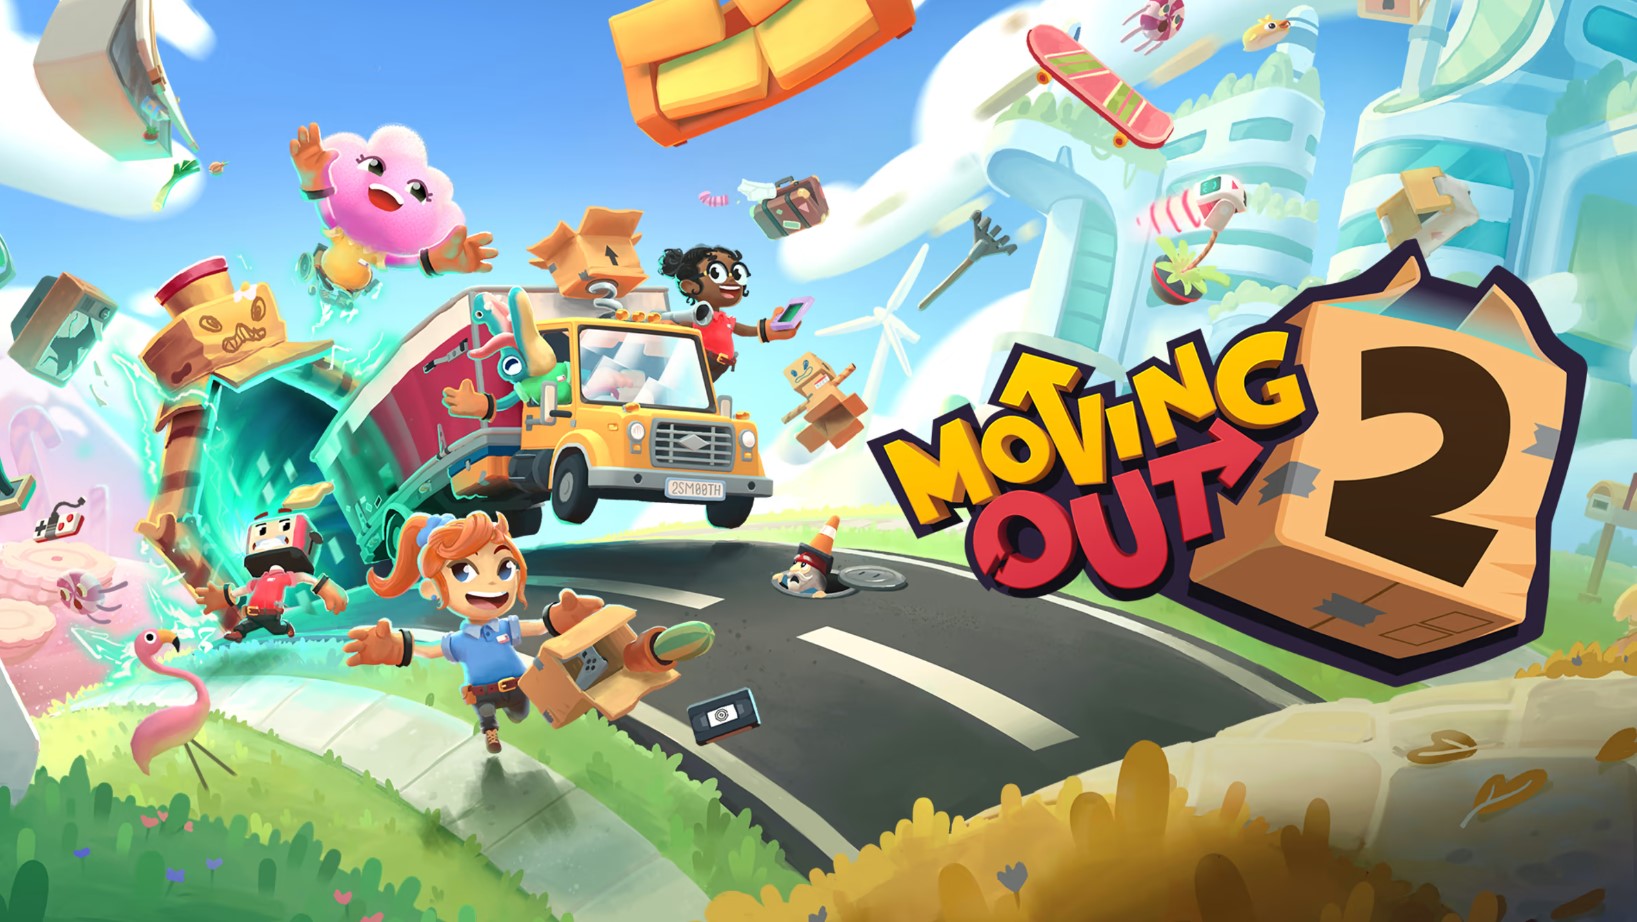 Moving Out 2 ja disponible a PC i consoles